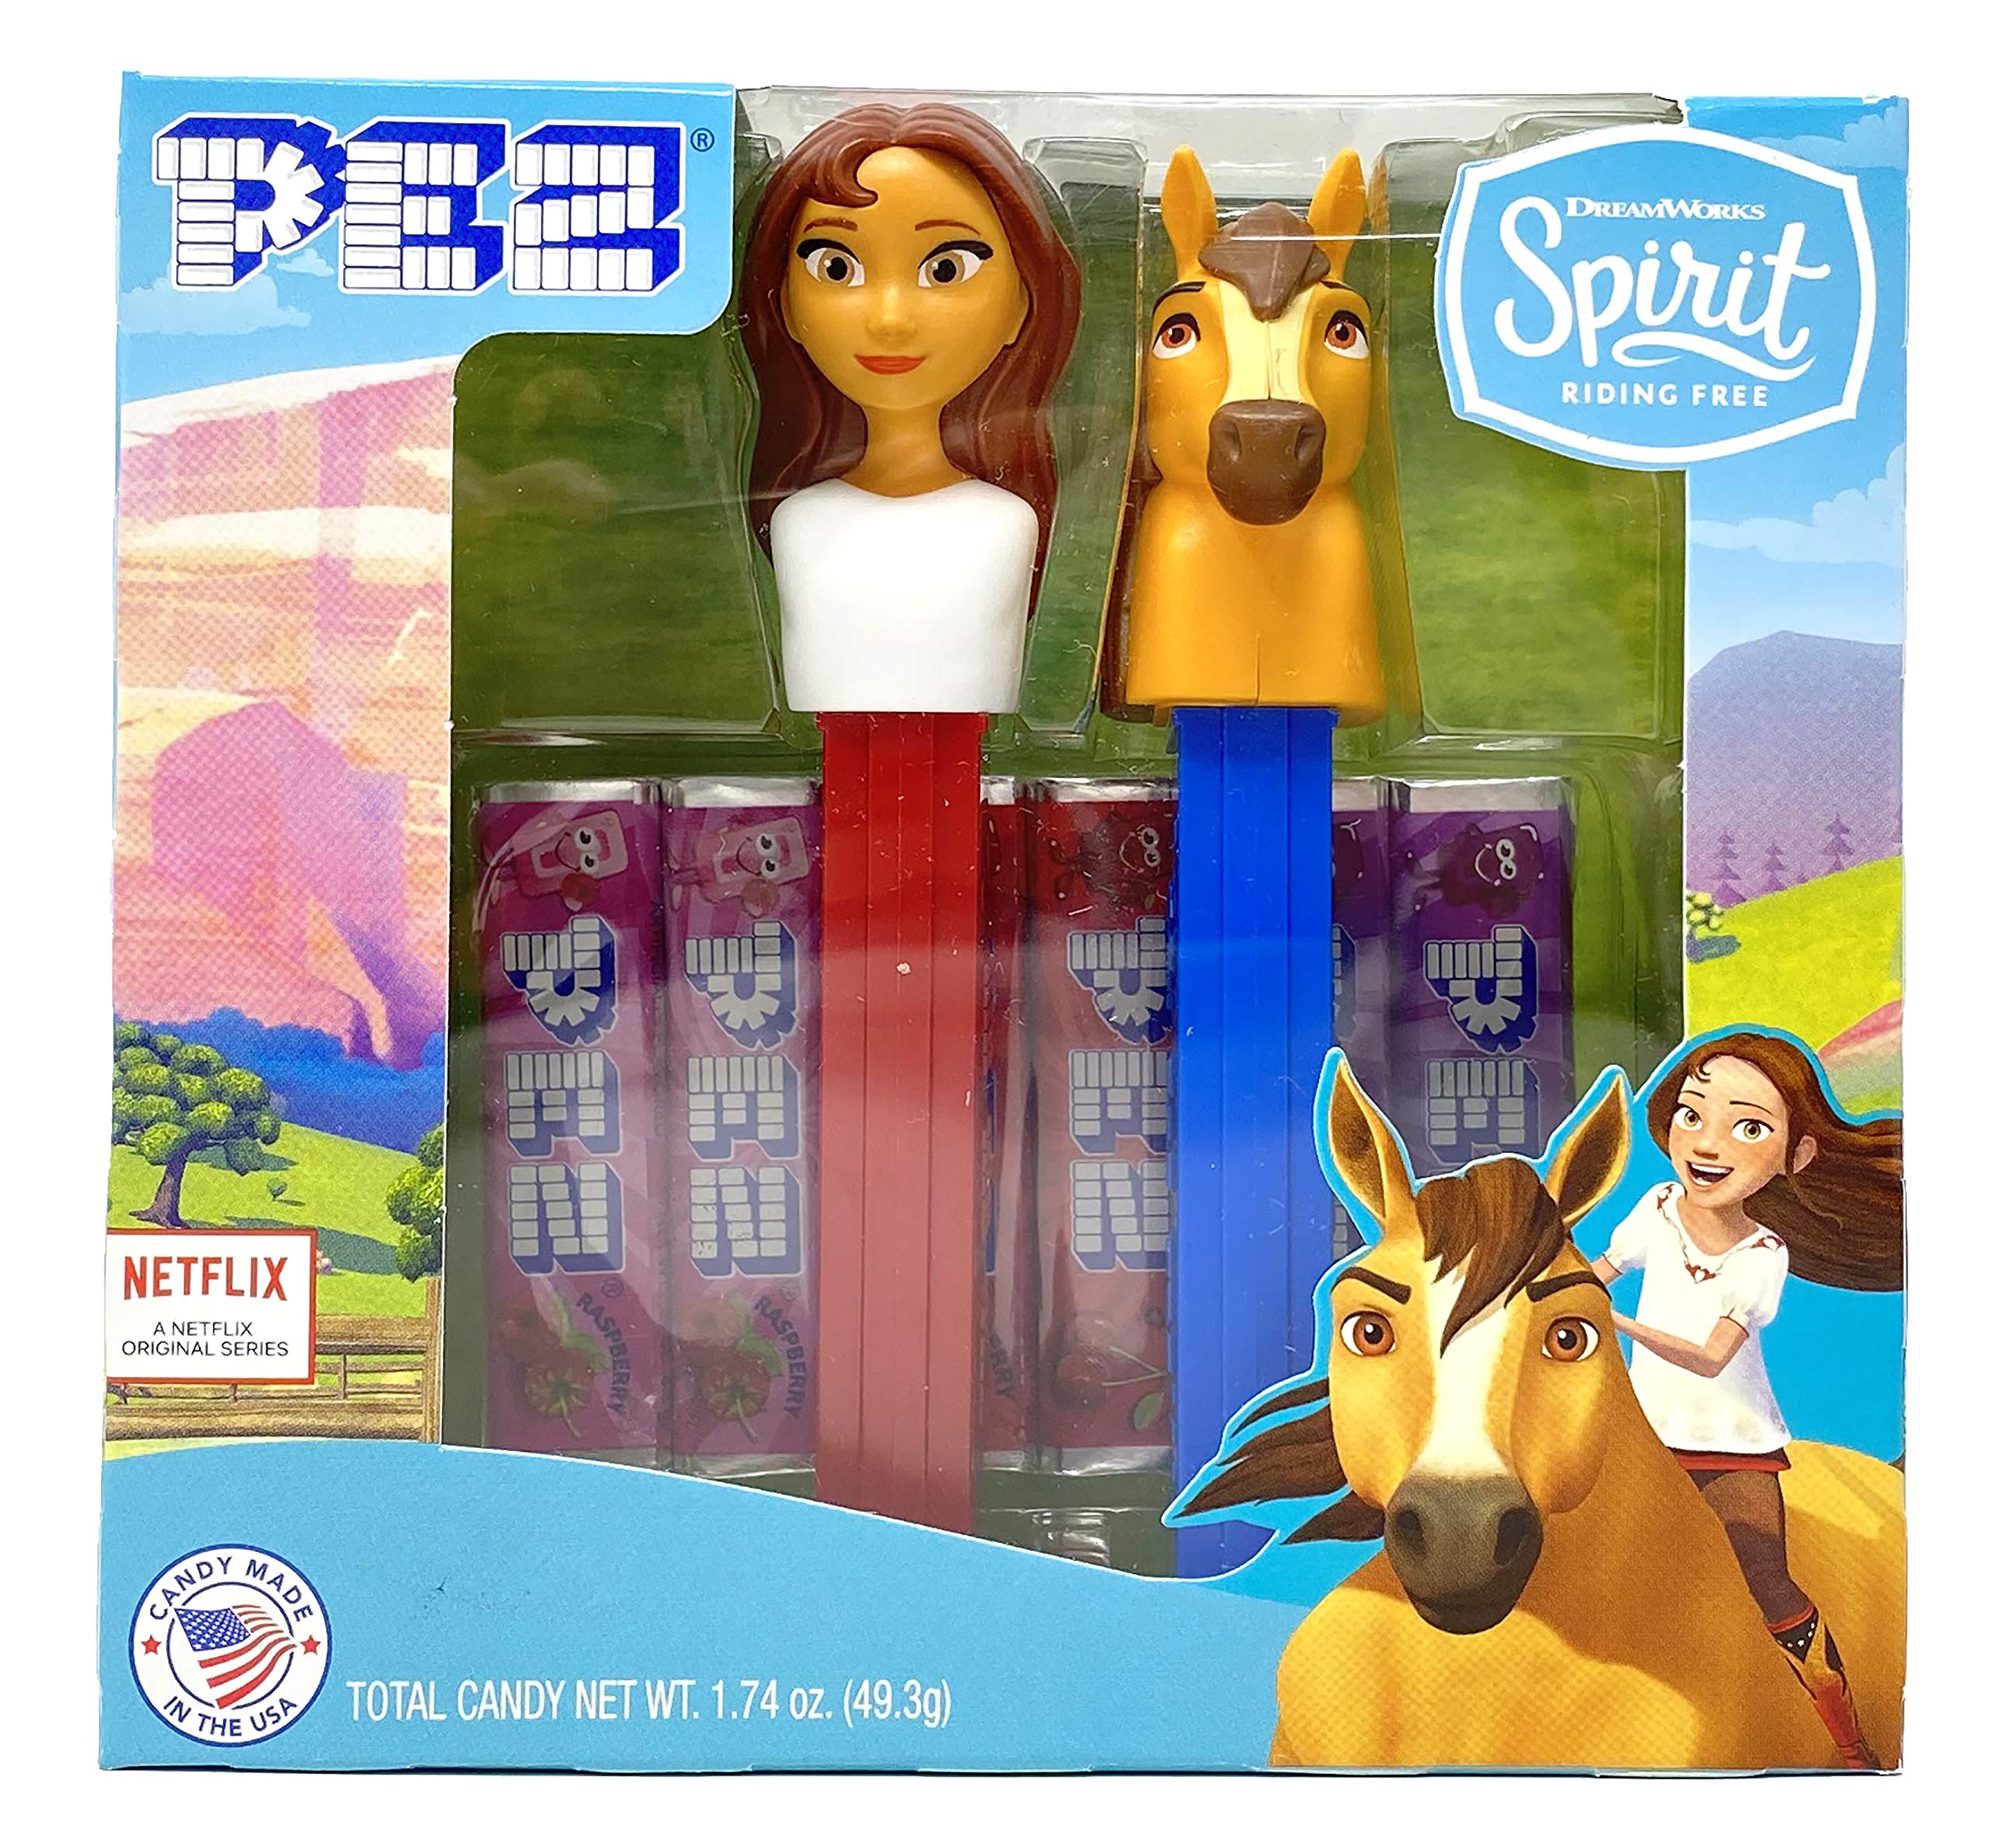 Pez candy Spirit gift Set - Includes Lucky and Spirit Dispensers and 6 Rolls, Mixed-Fruit, 1 count